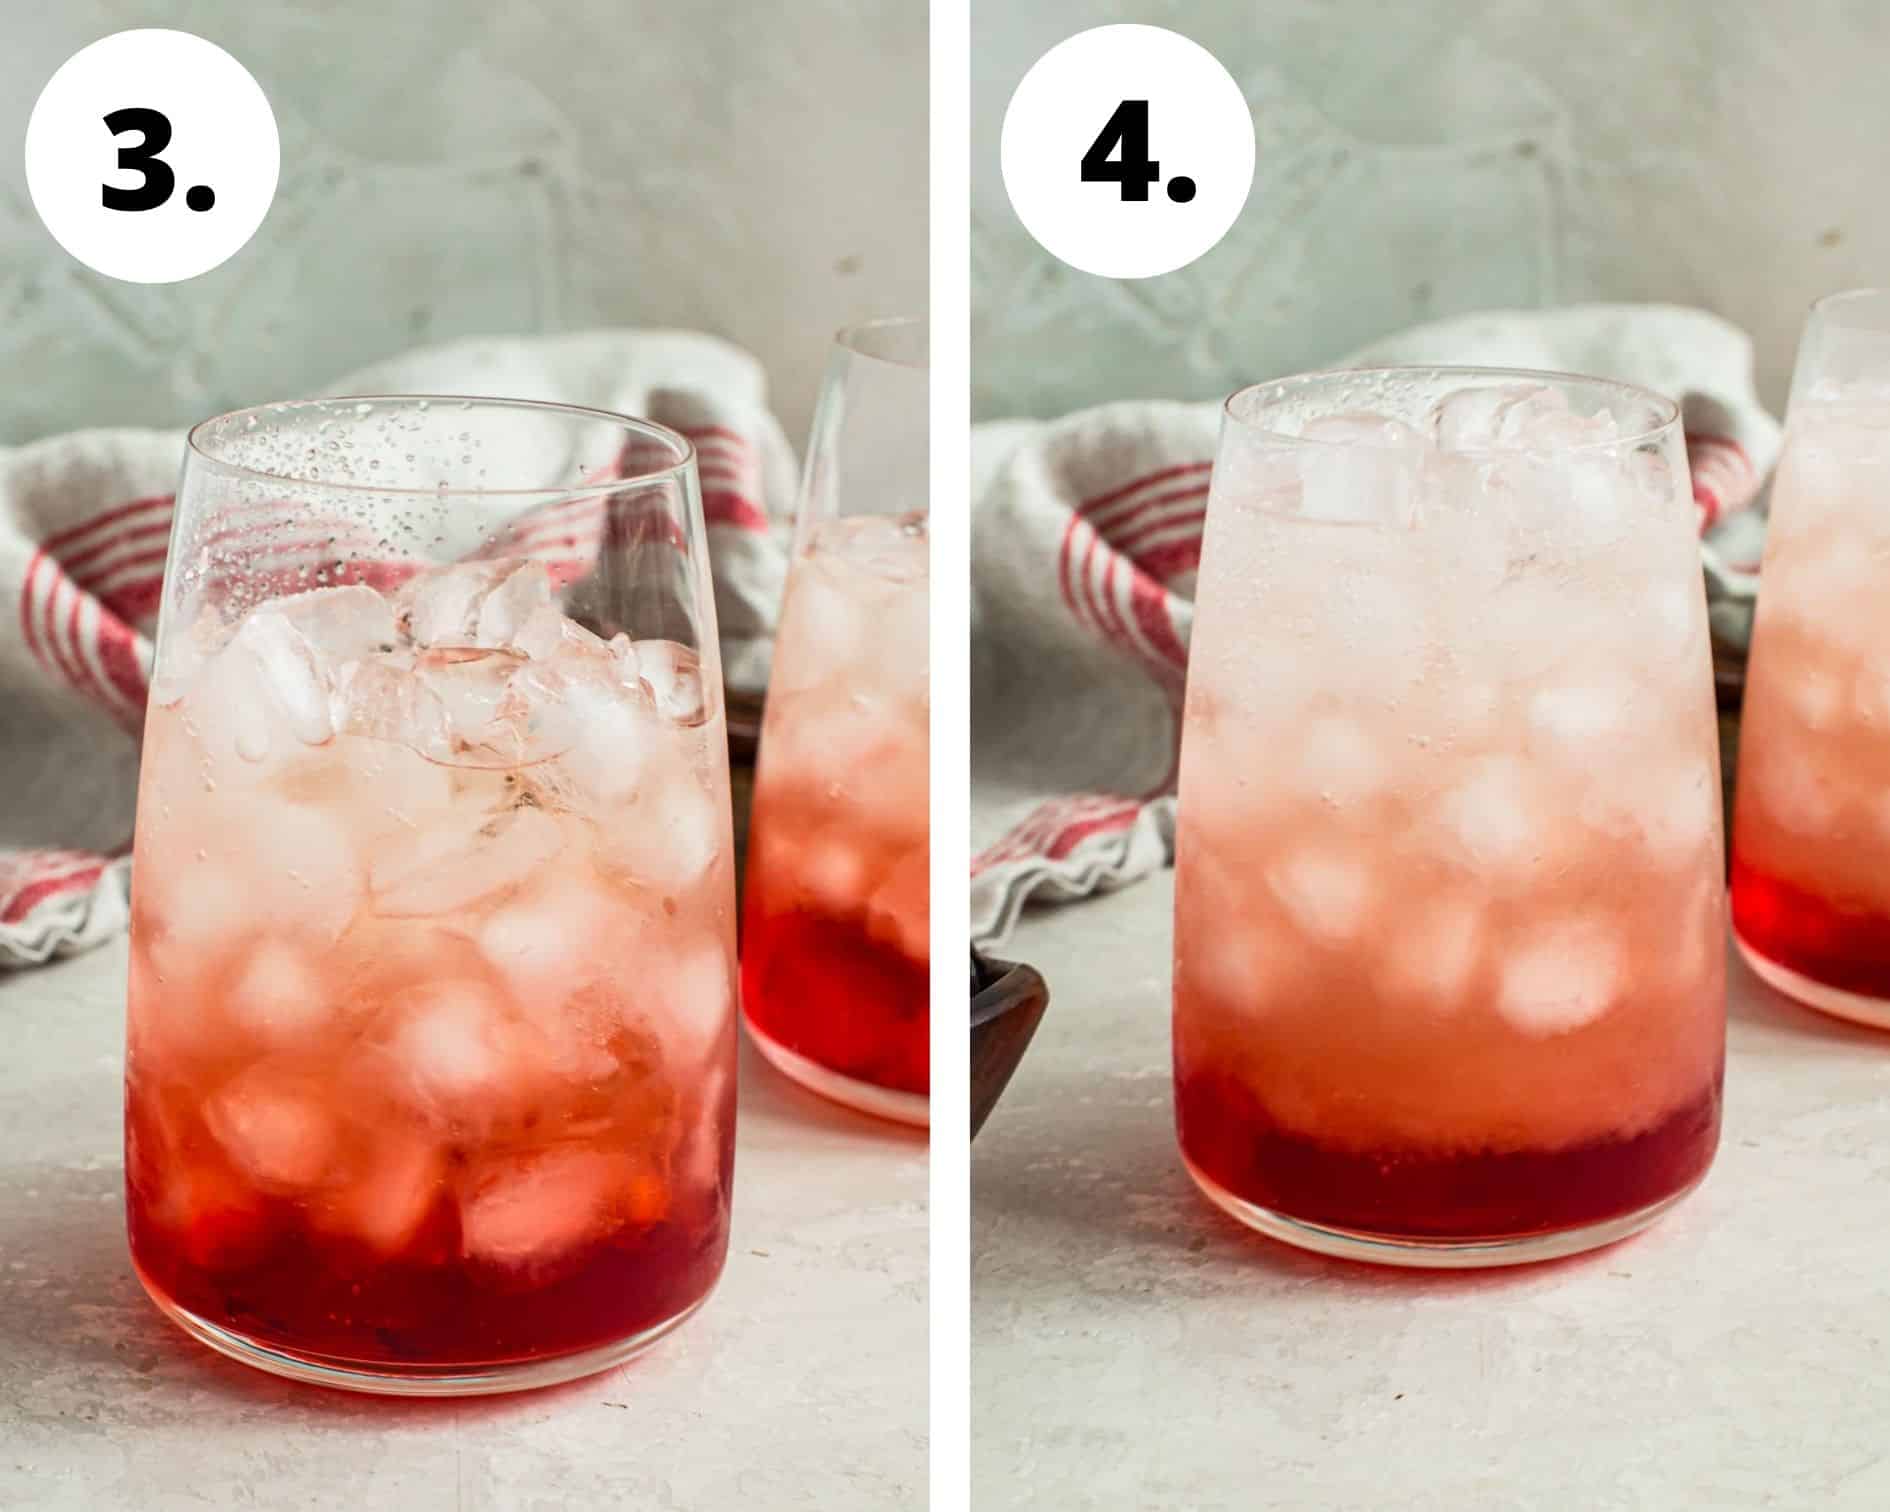 Shirley Temple drink process steps 3 and 4.